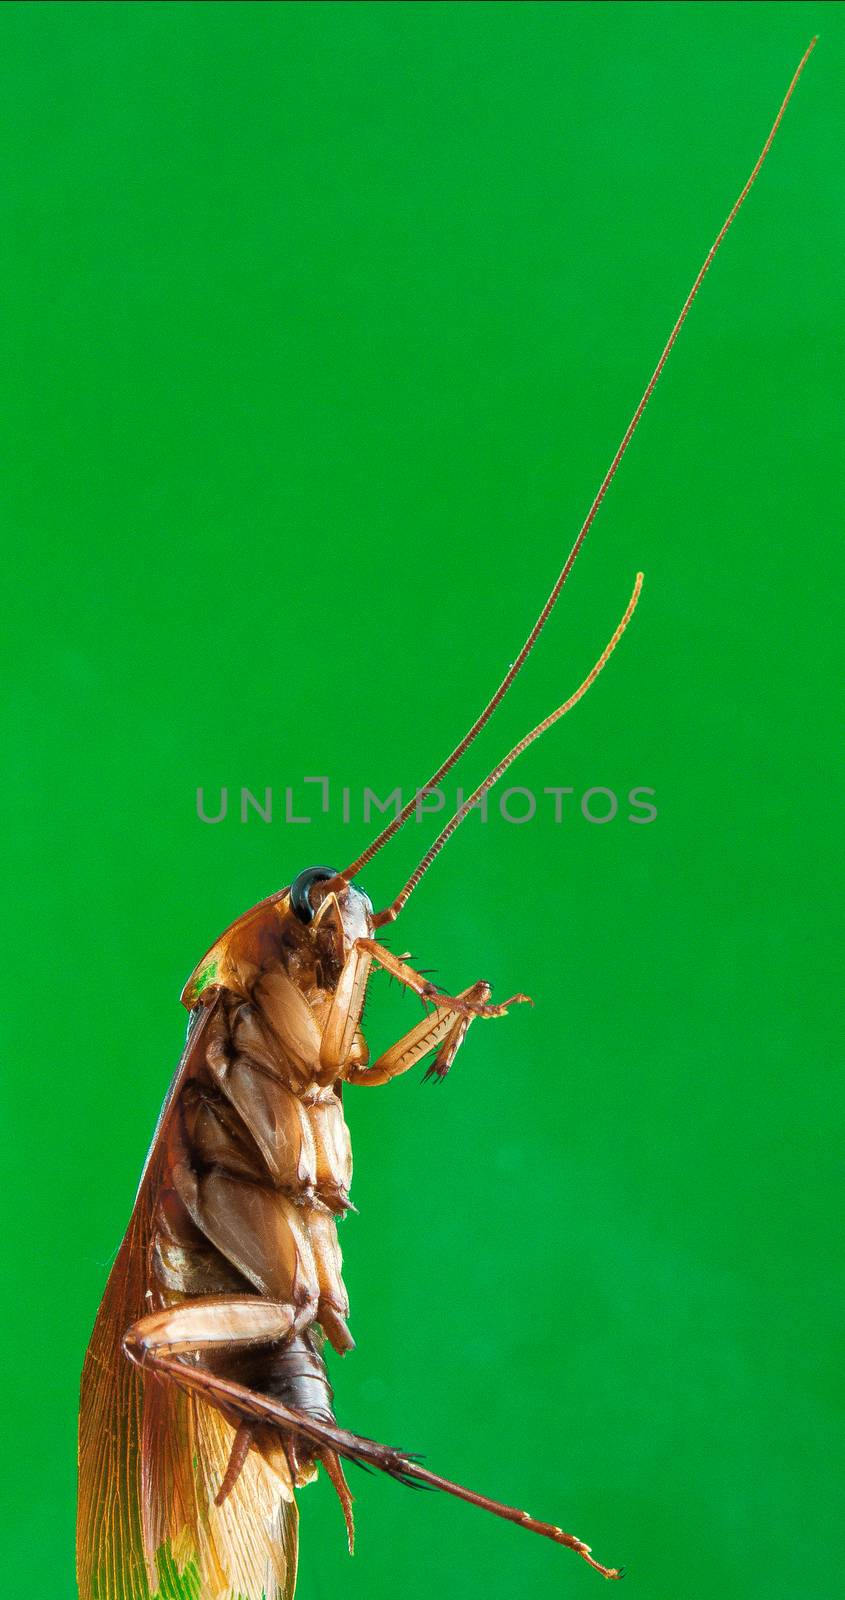 Cockroach with wings and long antennae photographed against a green background